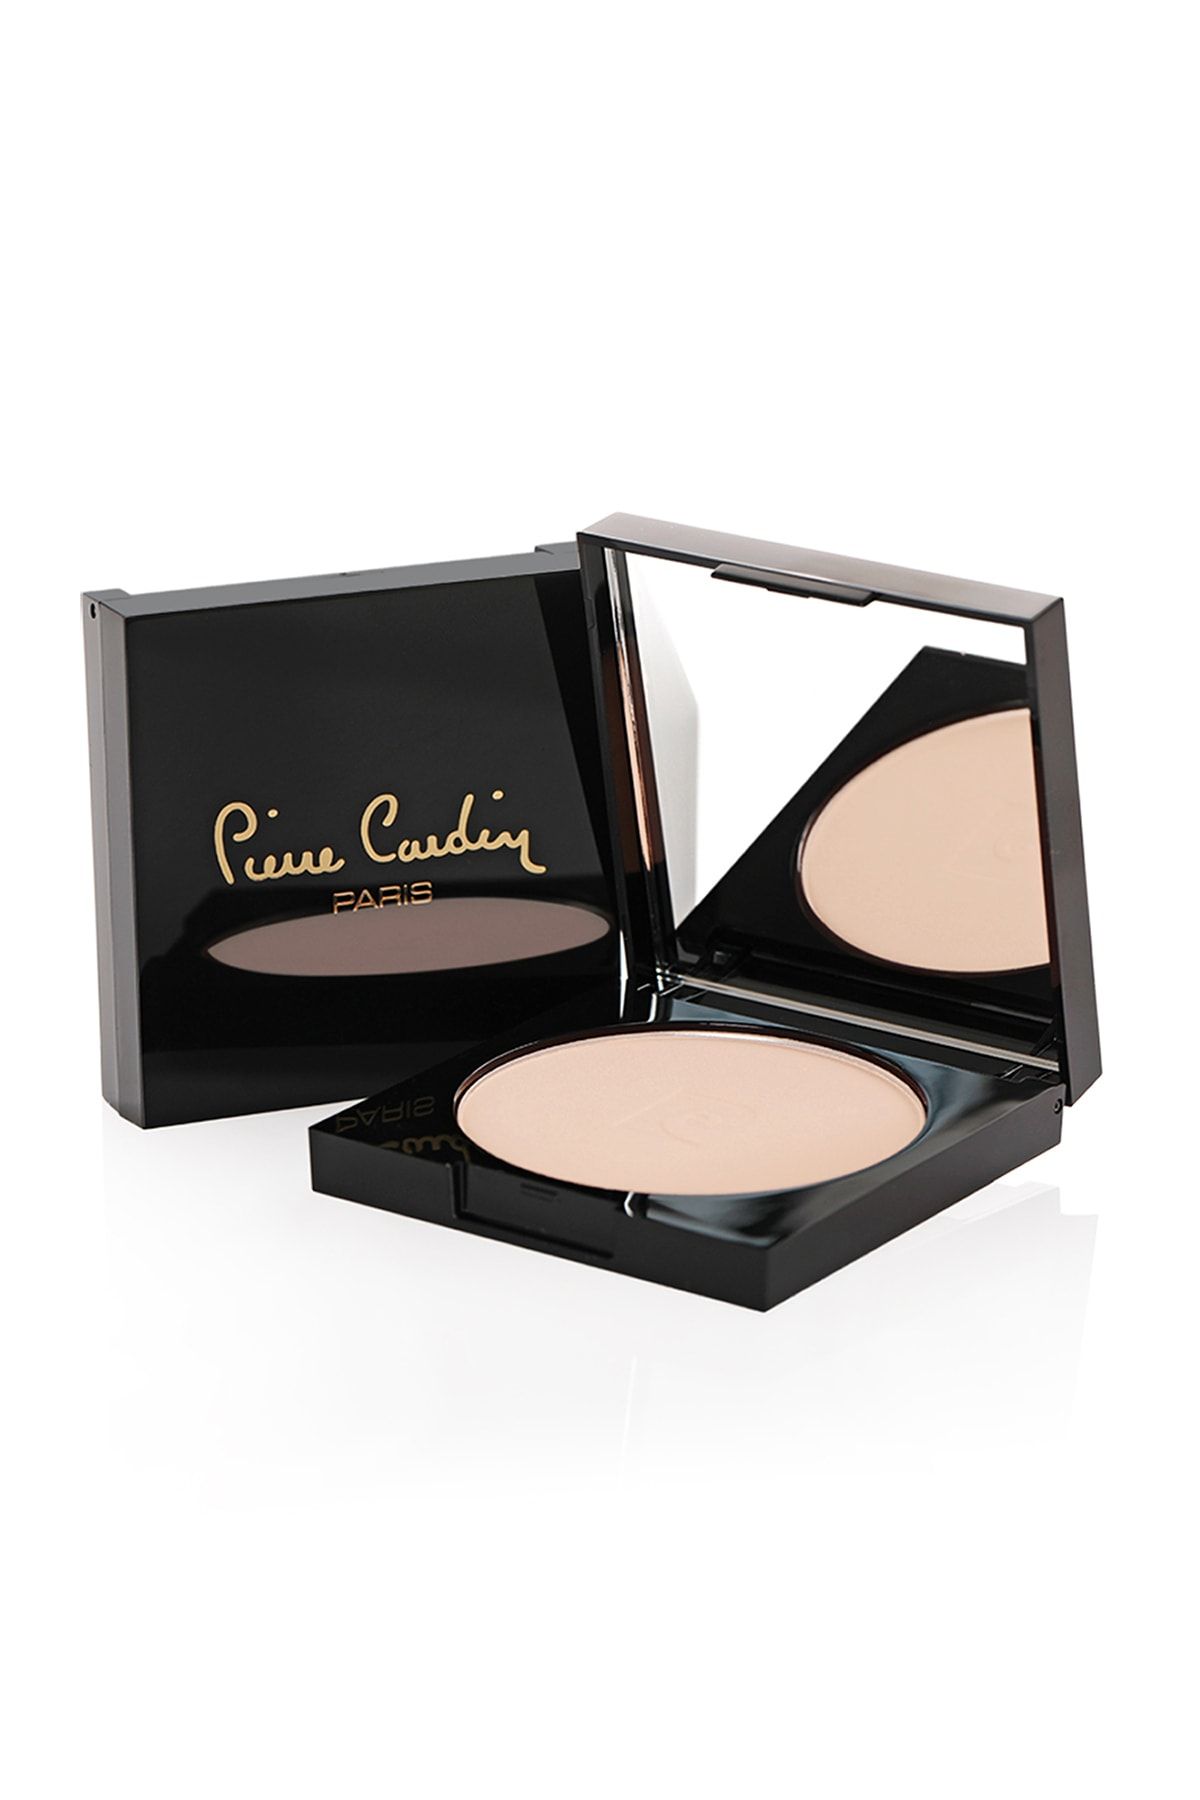 Pierre Cardin Porcelain Edition Compact Powder -Neutral Ivory Pudra